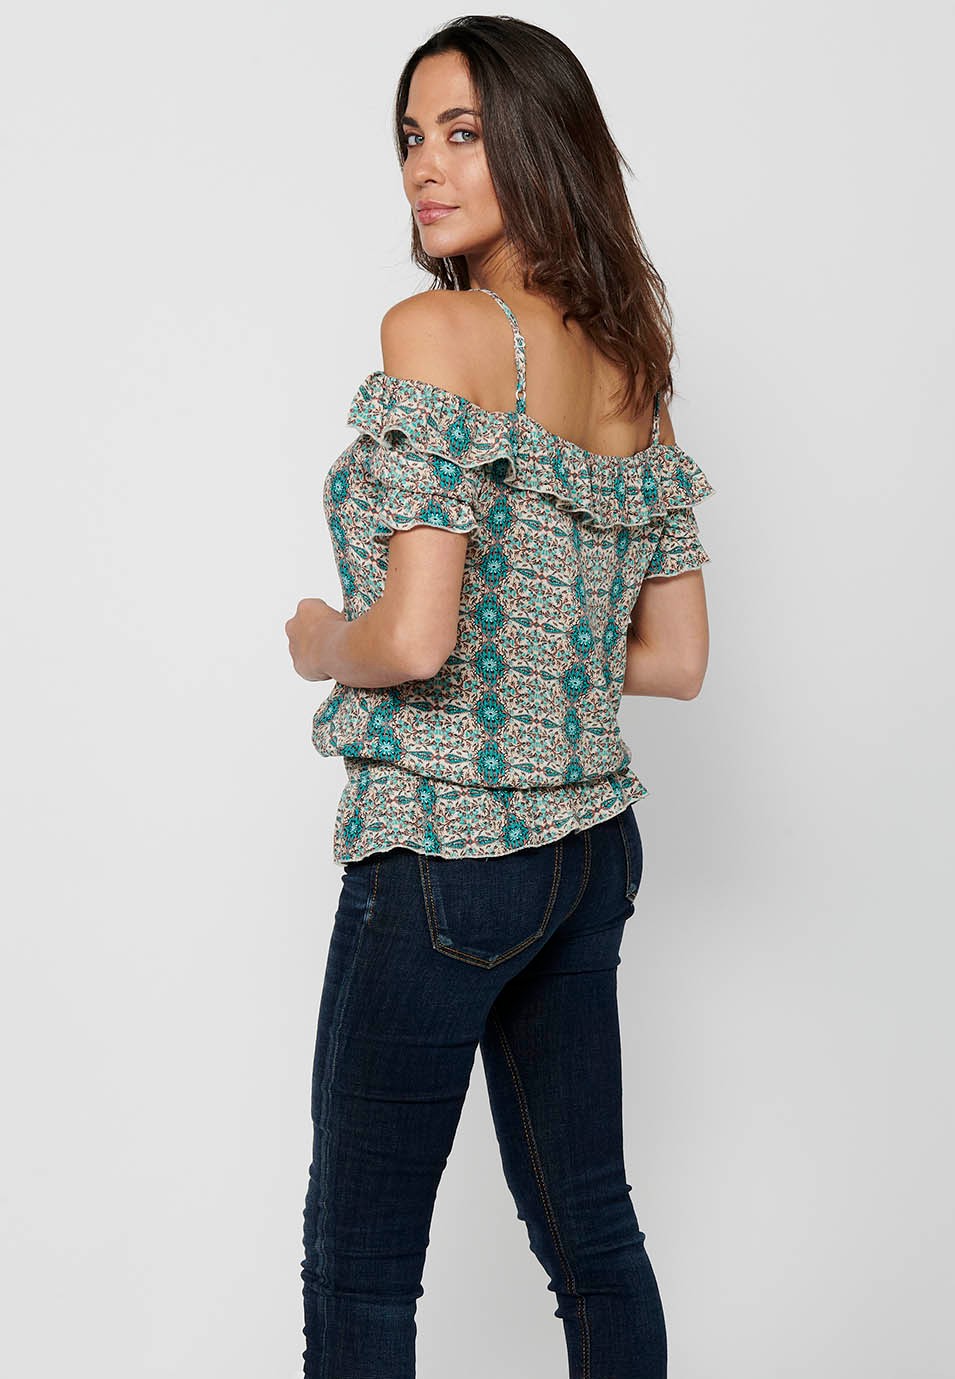 Short Sleeve Blouse with Shoulder Straps and Blue Floral Print for Women 6